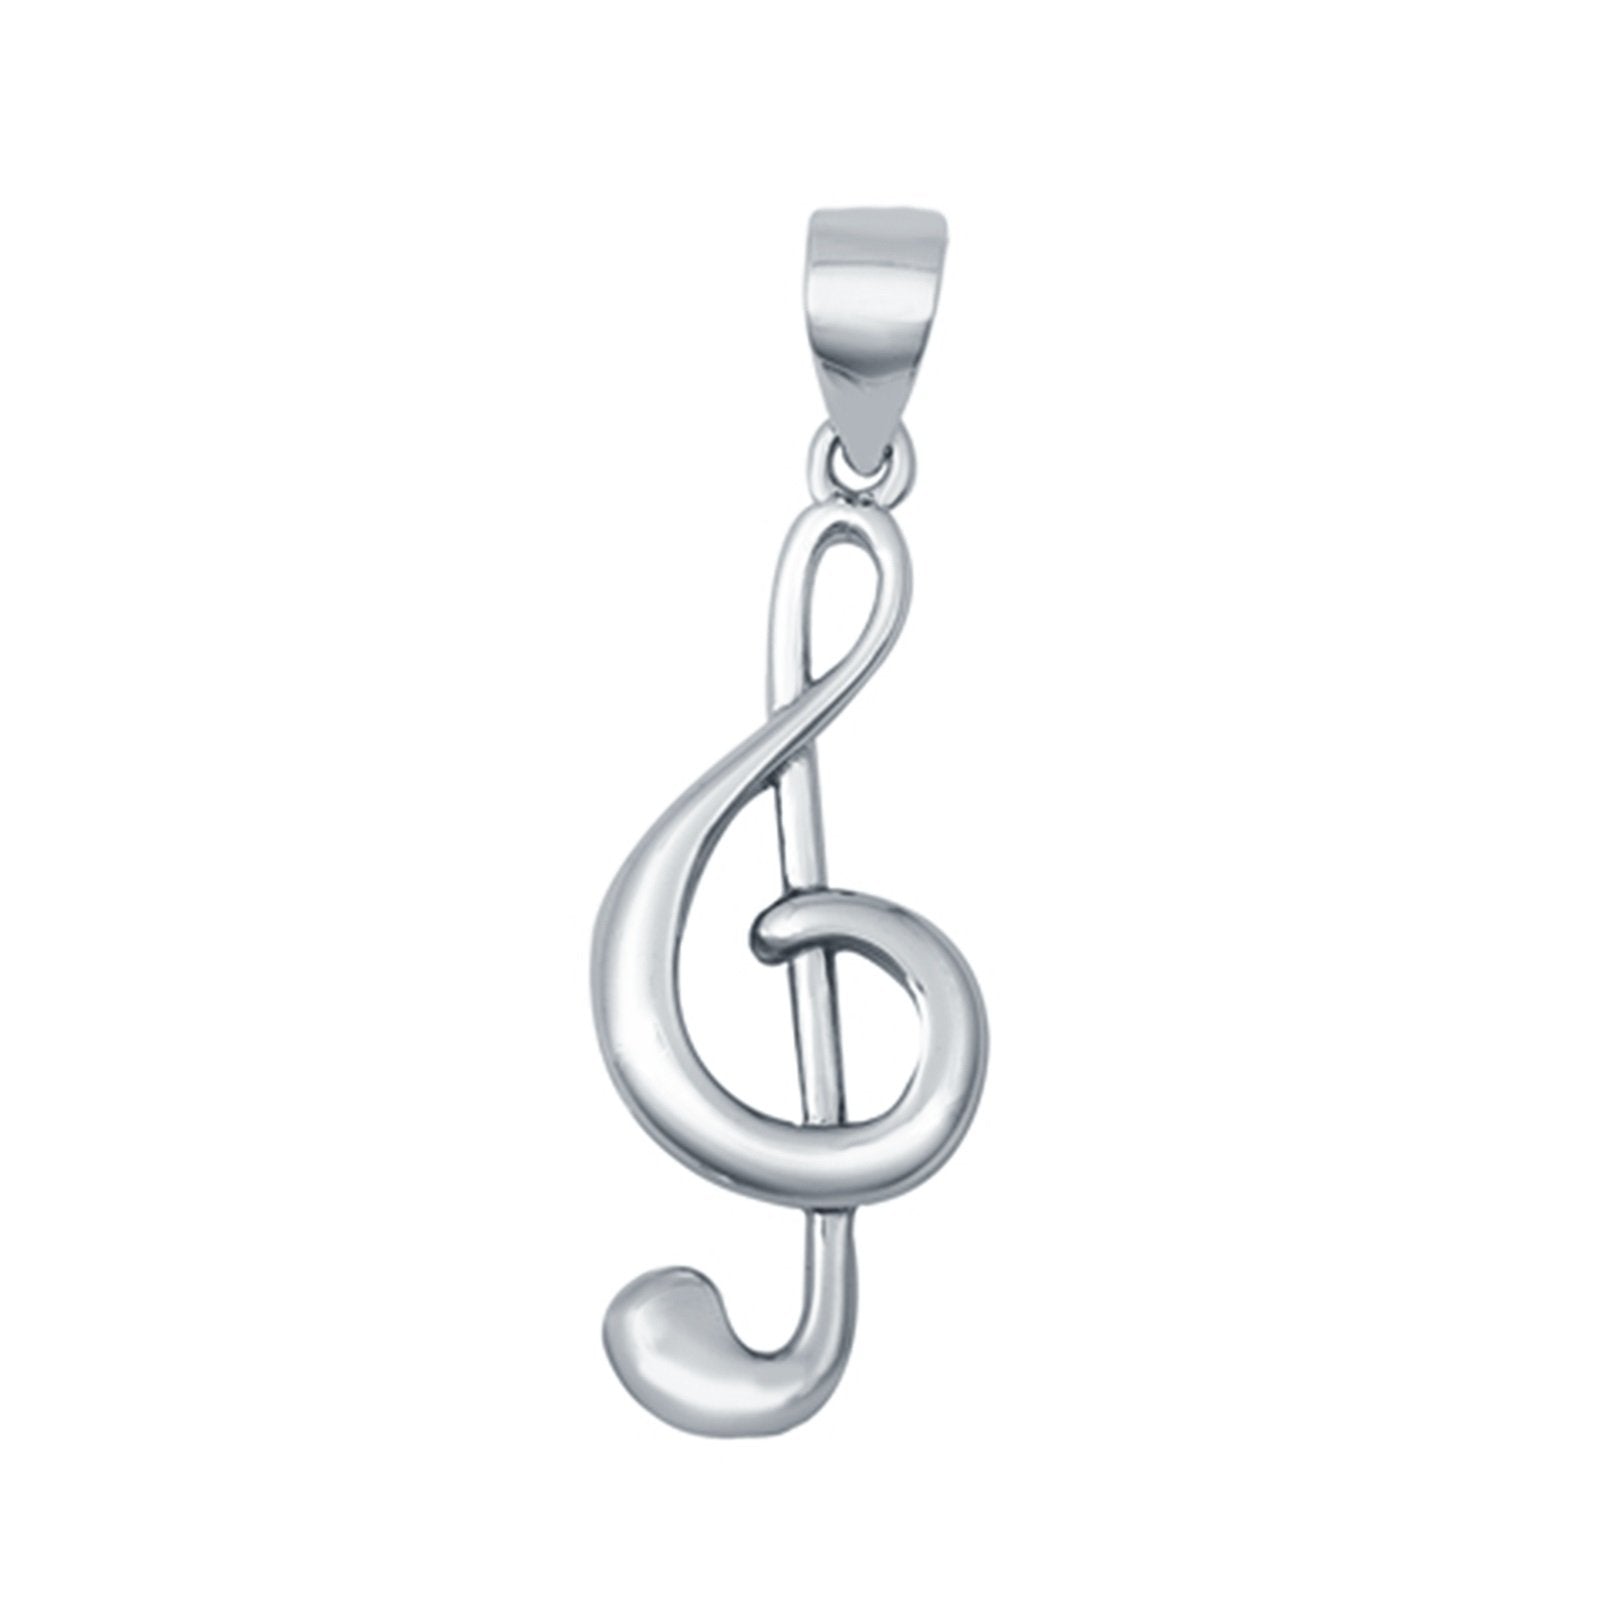 Silver Music Note Charm Pendant 925 Sterling Silver (21mm)